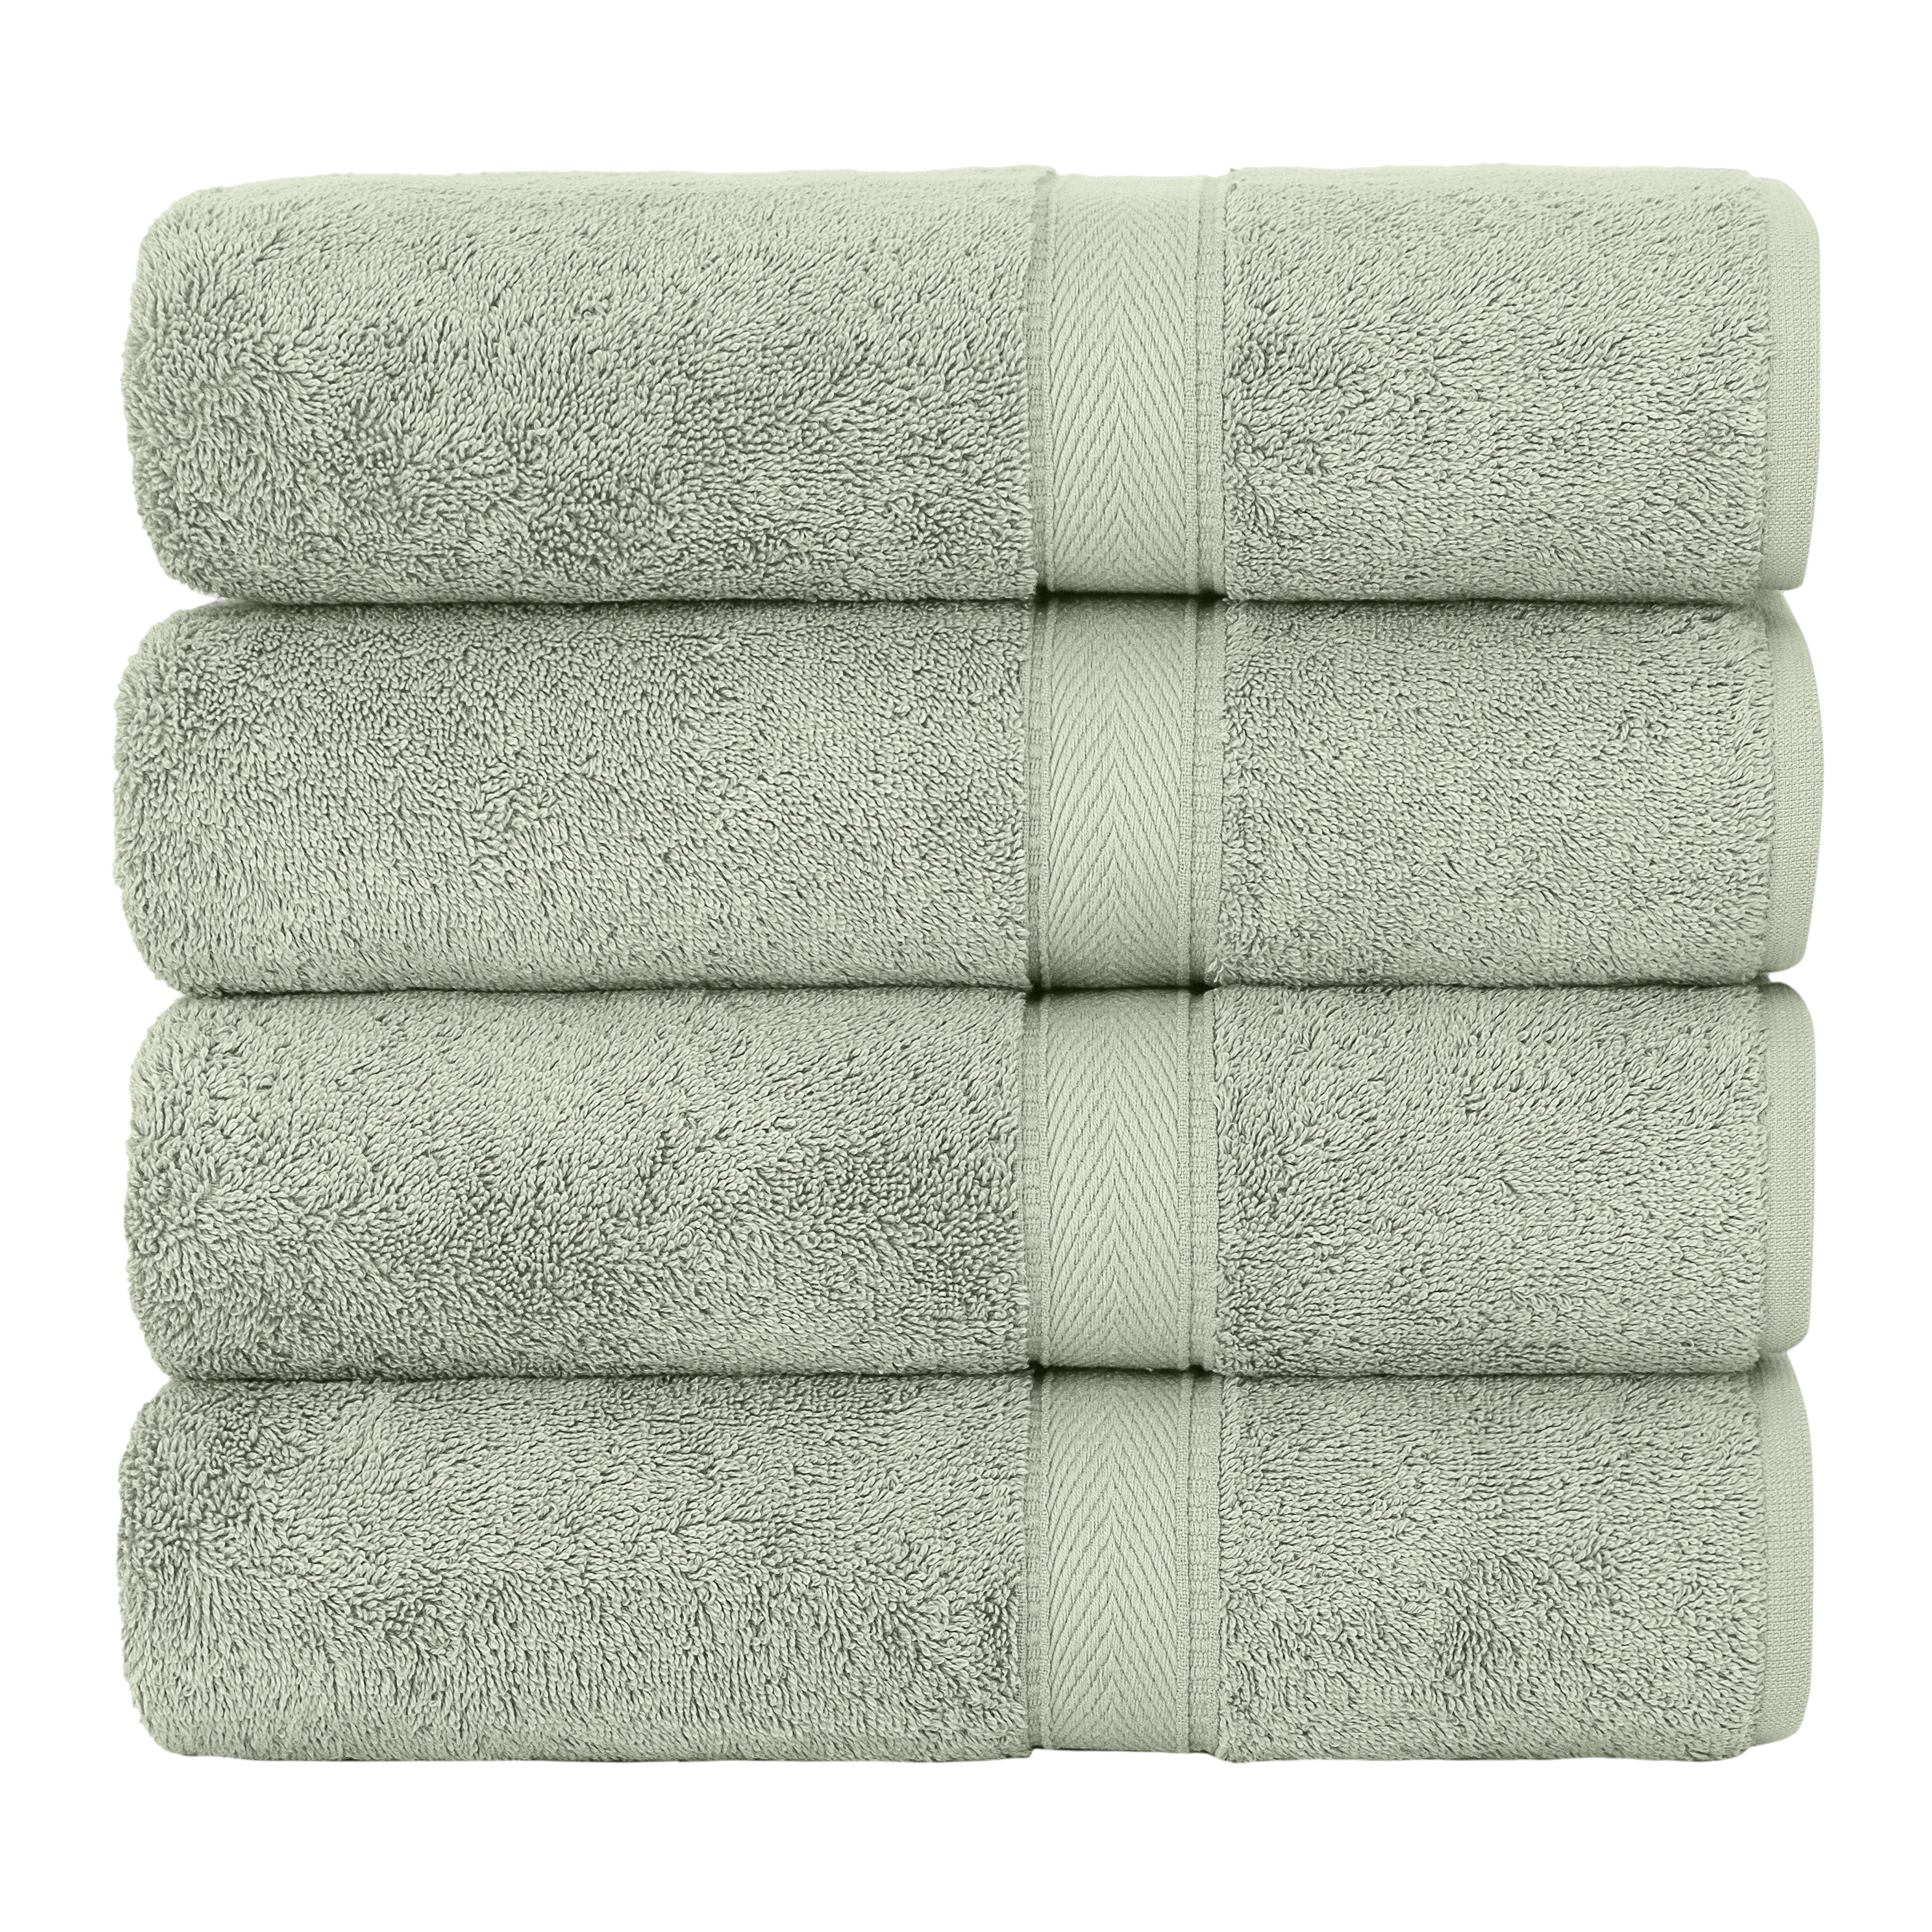 https://ak1.ostkcdn.com/images/products/is/images/direct/0d6e212417b8710bfbd09d087b6459201ee91342/Authentic-Hotel-and-Spa-Turkish-Cotton-Bath-Towels-%28Set-of-4%29.jpg